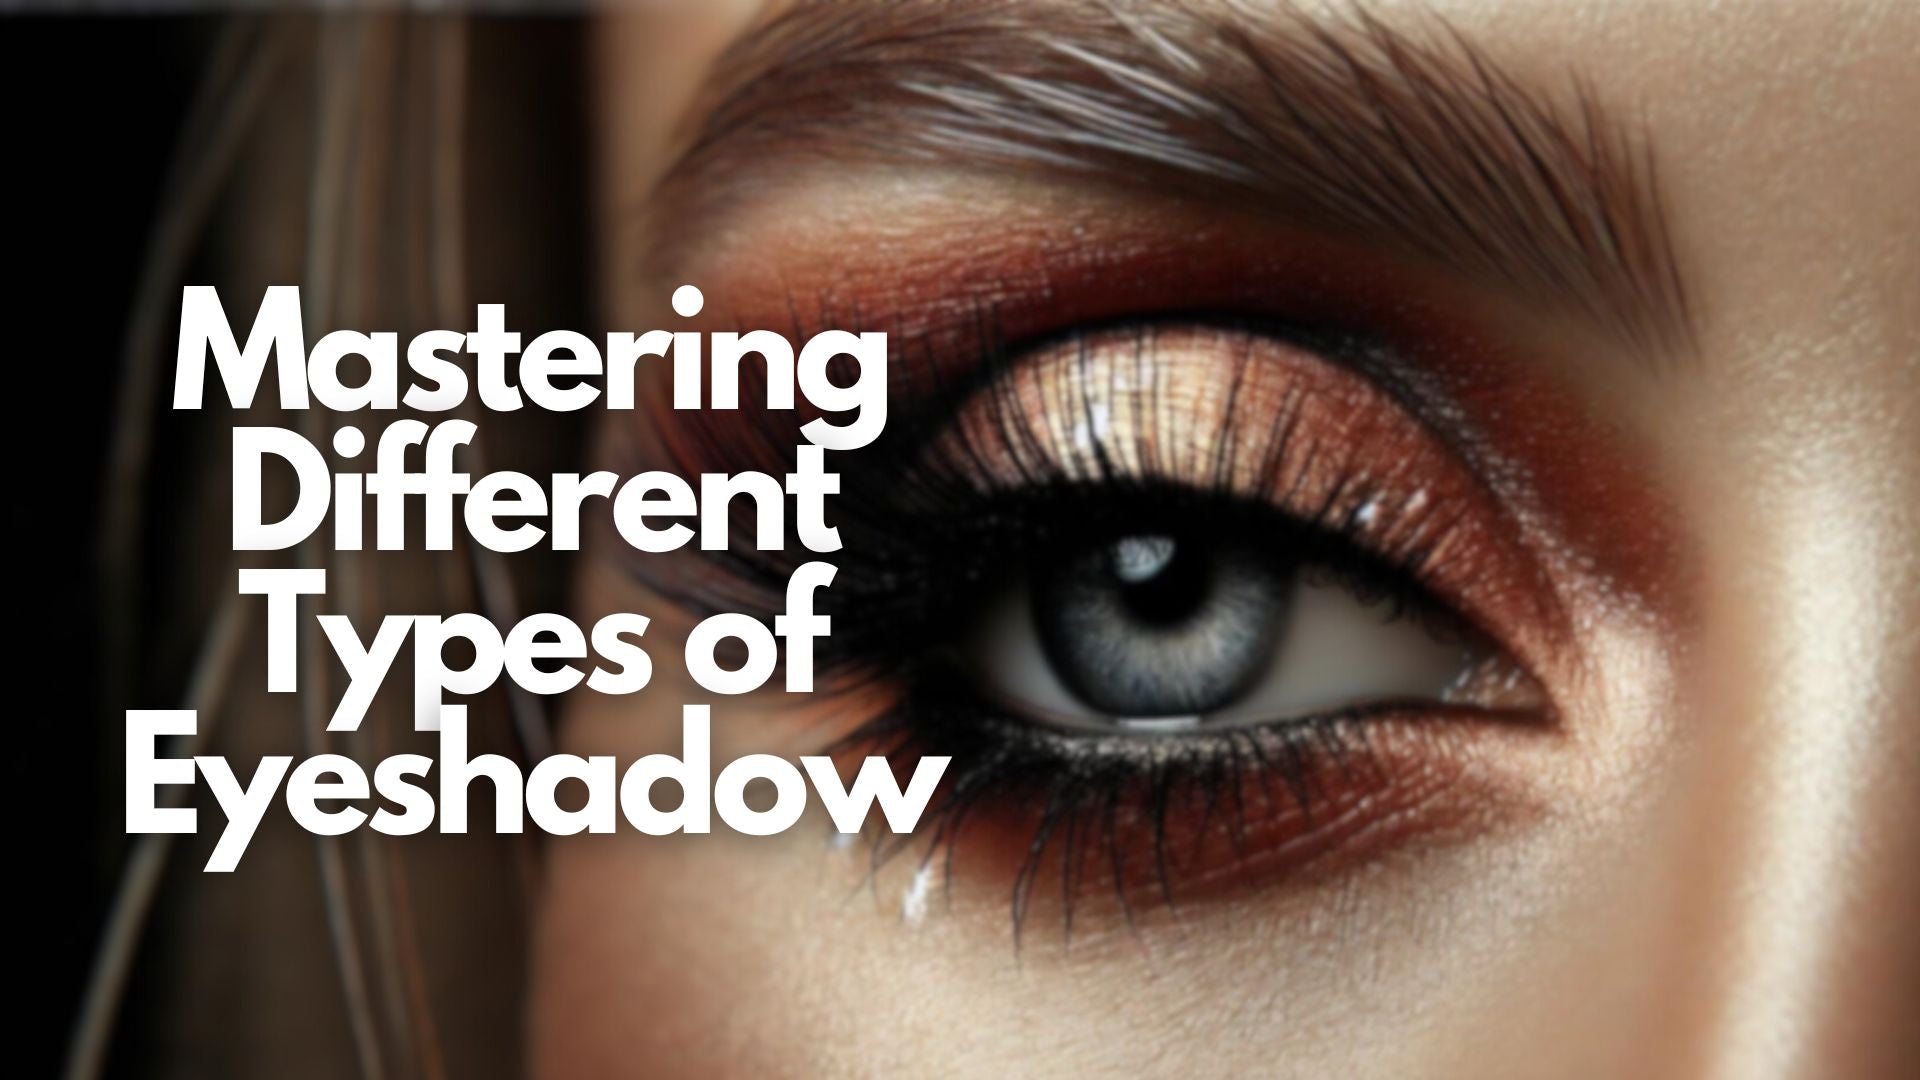 Mastering Different Types of Eyeshadow for Every Look